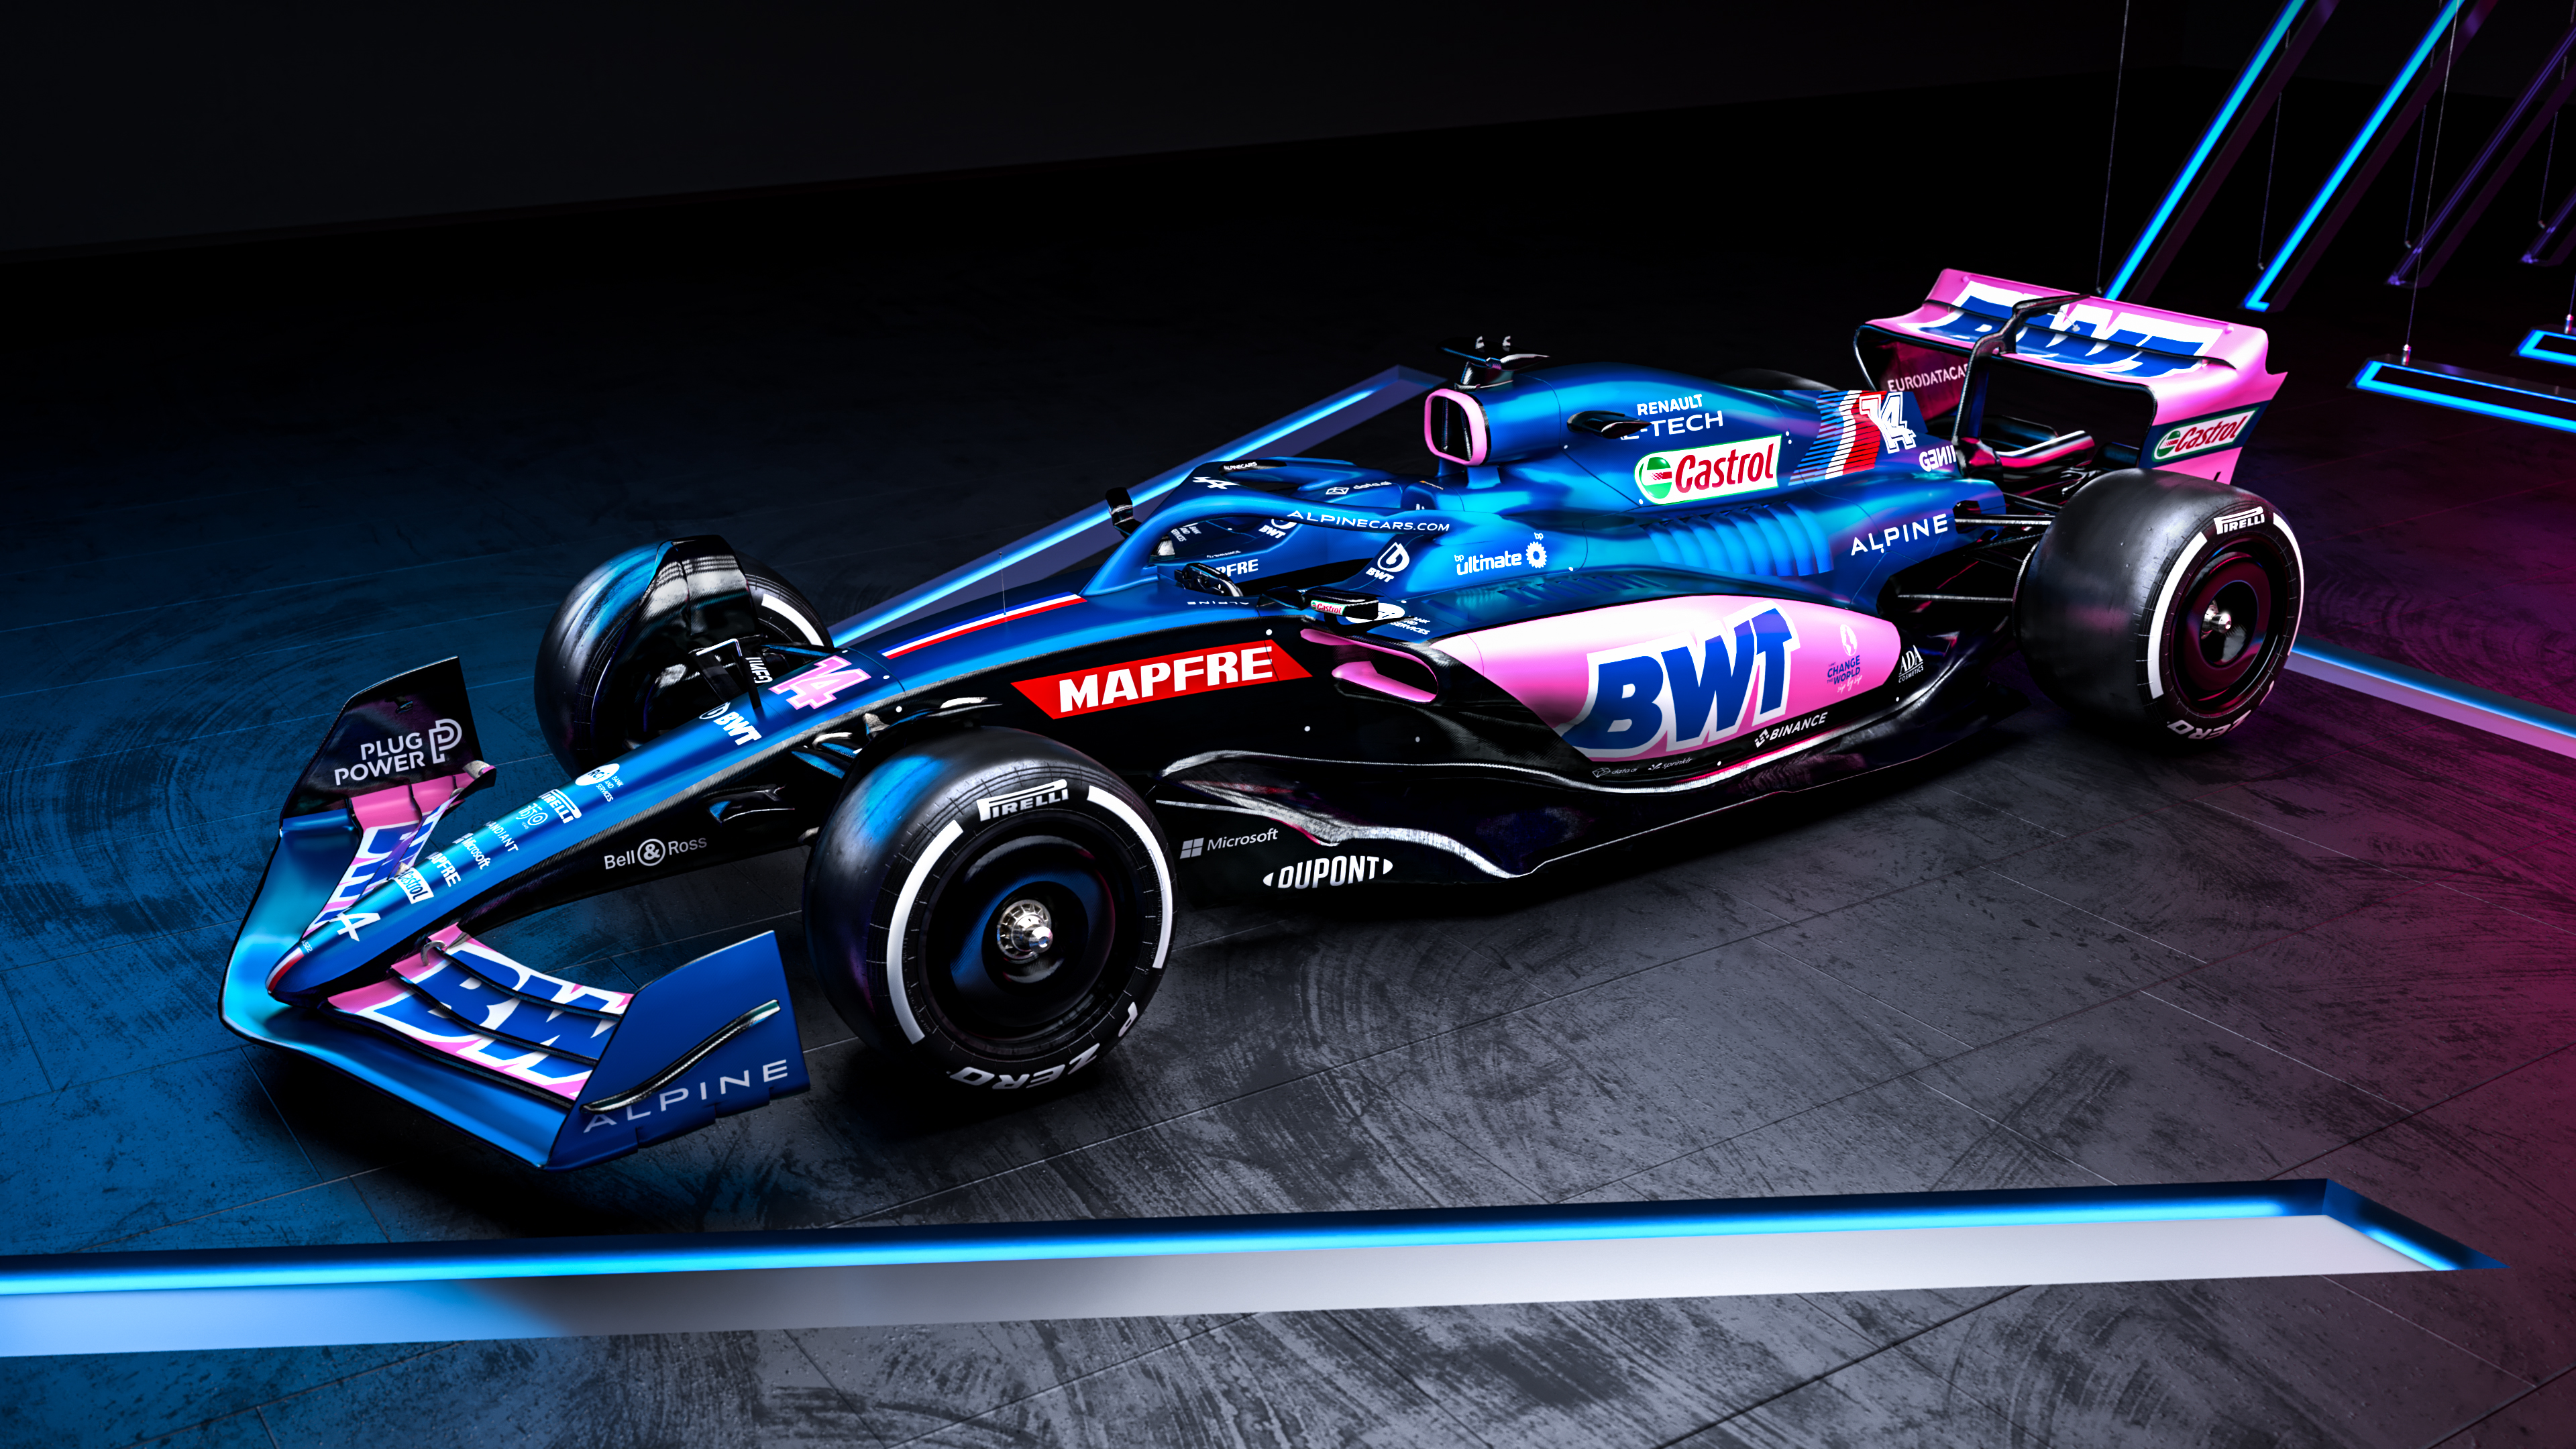 Alpine presents not one but two paint schemes